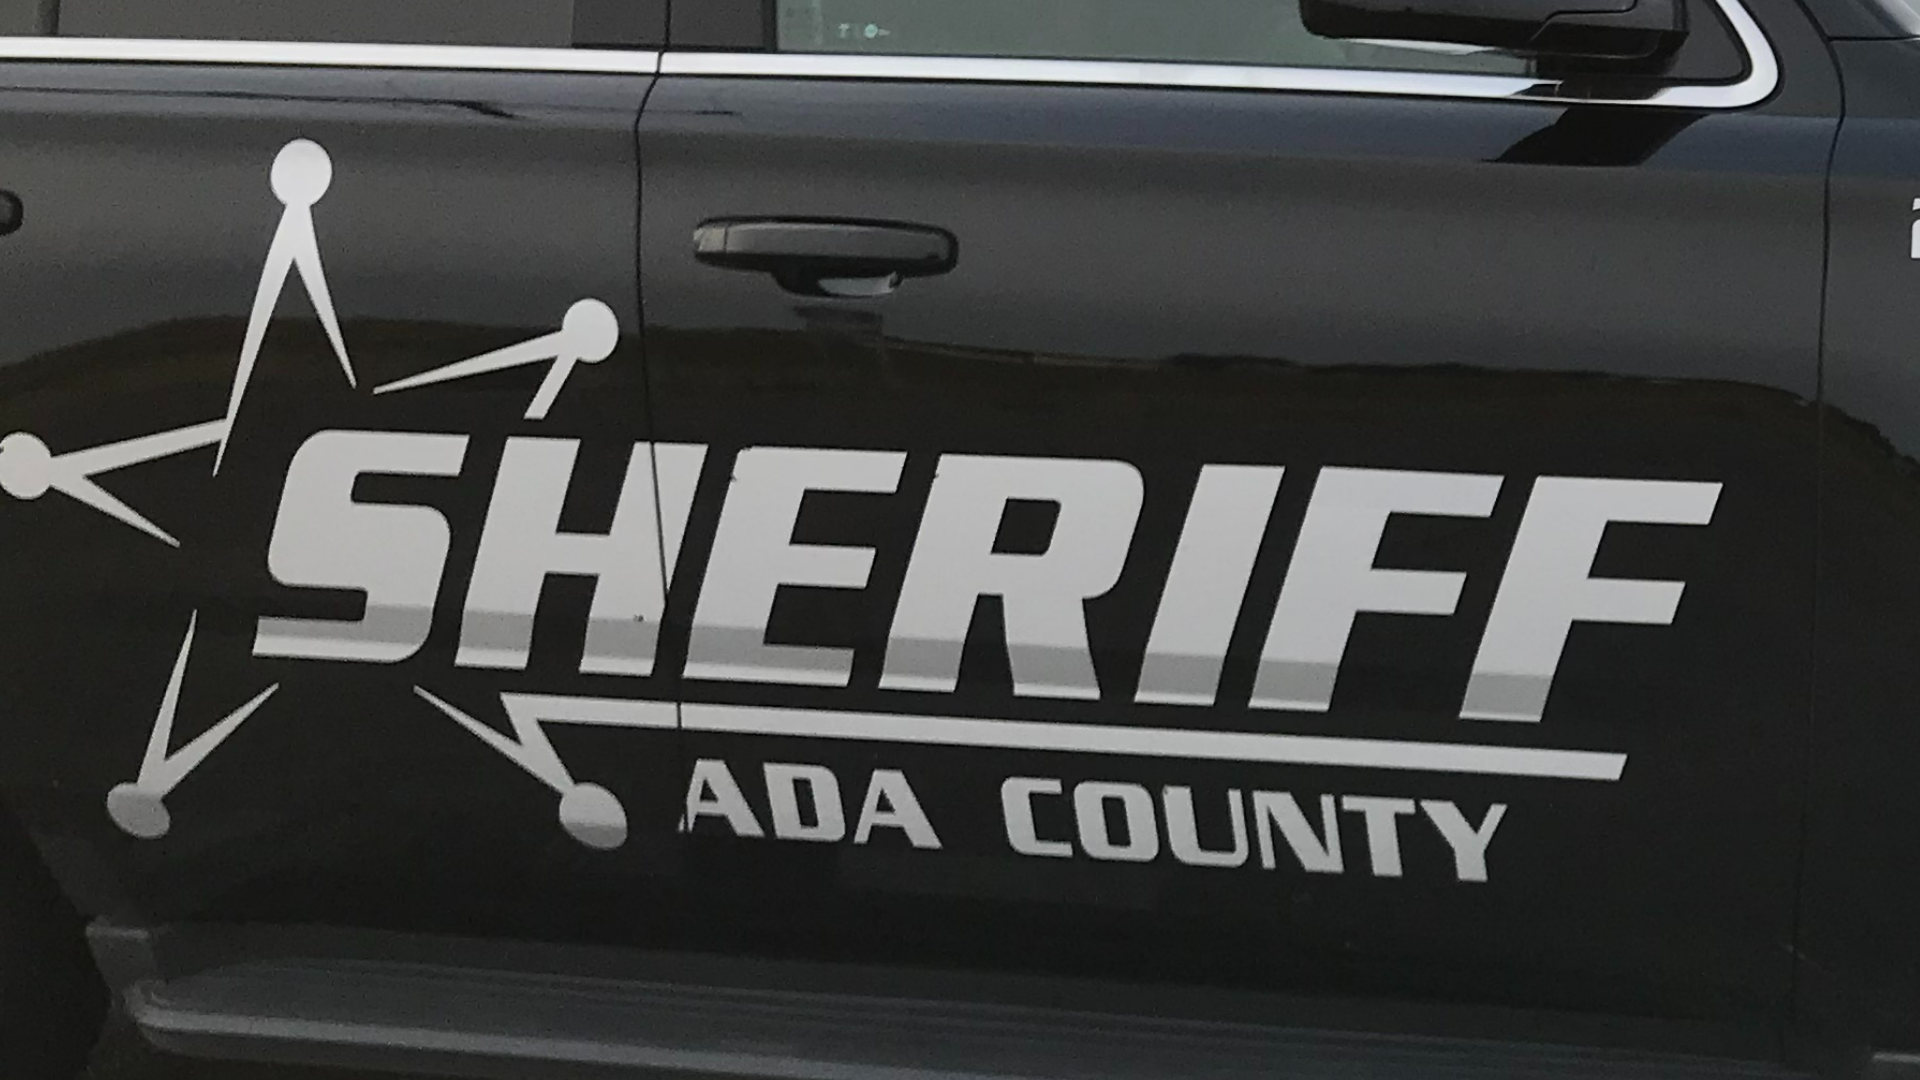 The Ada County Sheriff's Office said people with firework-related issues can call the non-emergency line at 208-377-6790.